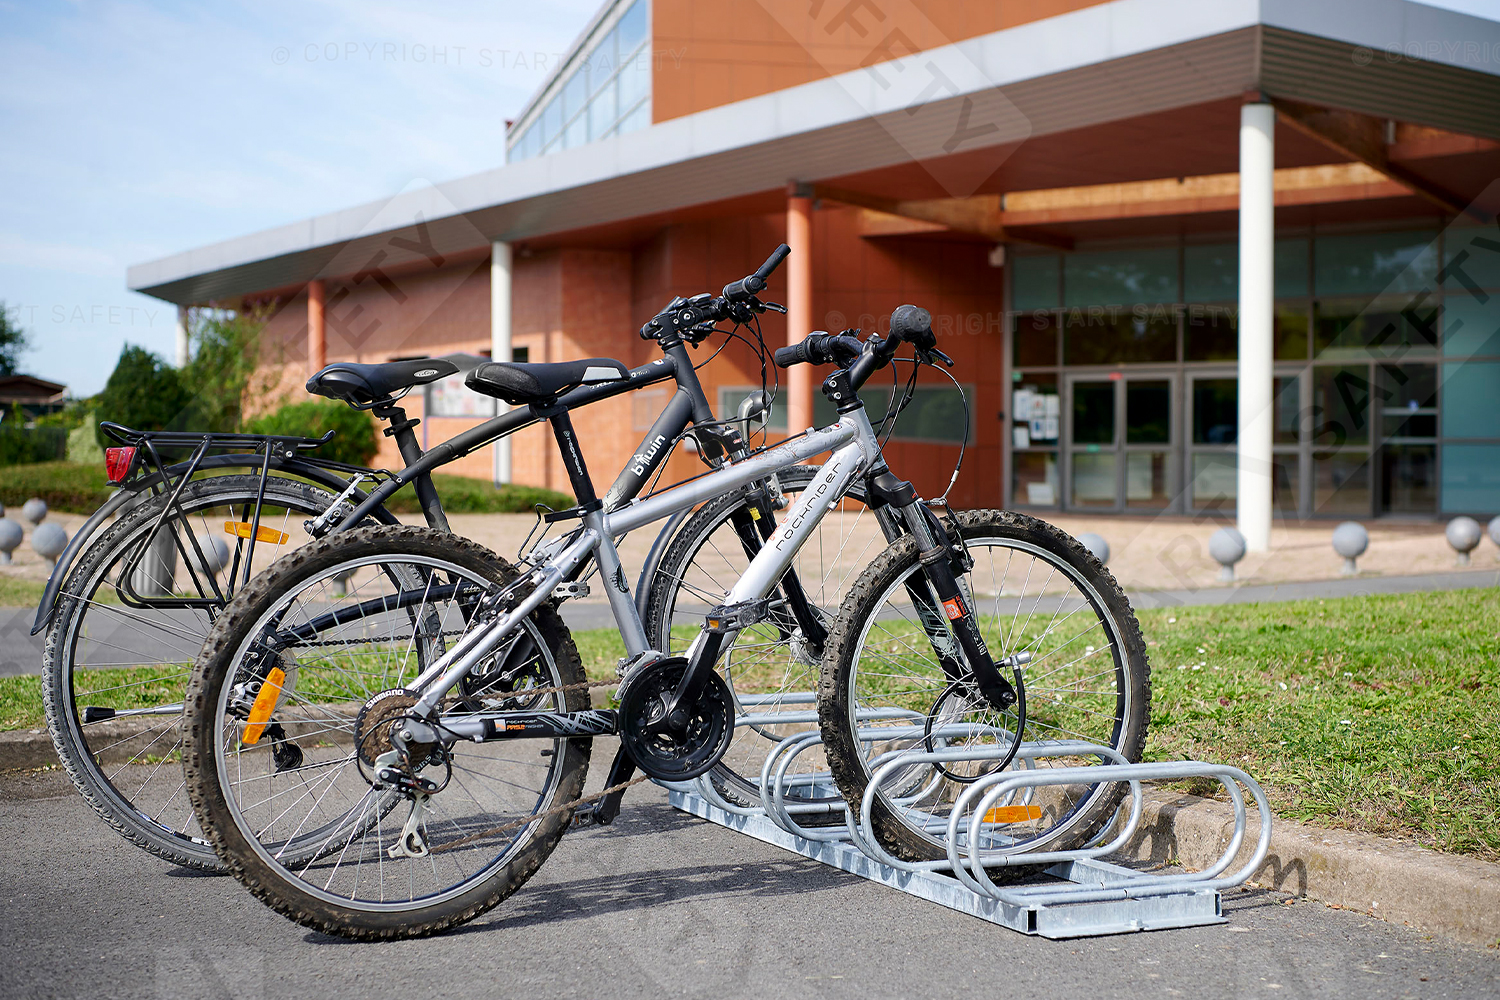 Economy Bike Rack With Bikes Parked Overview